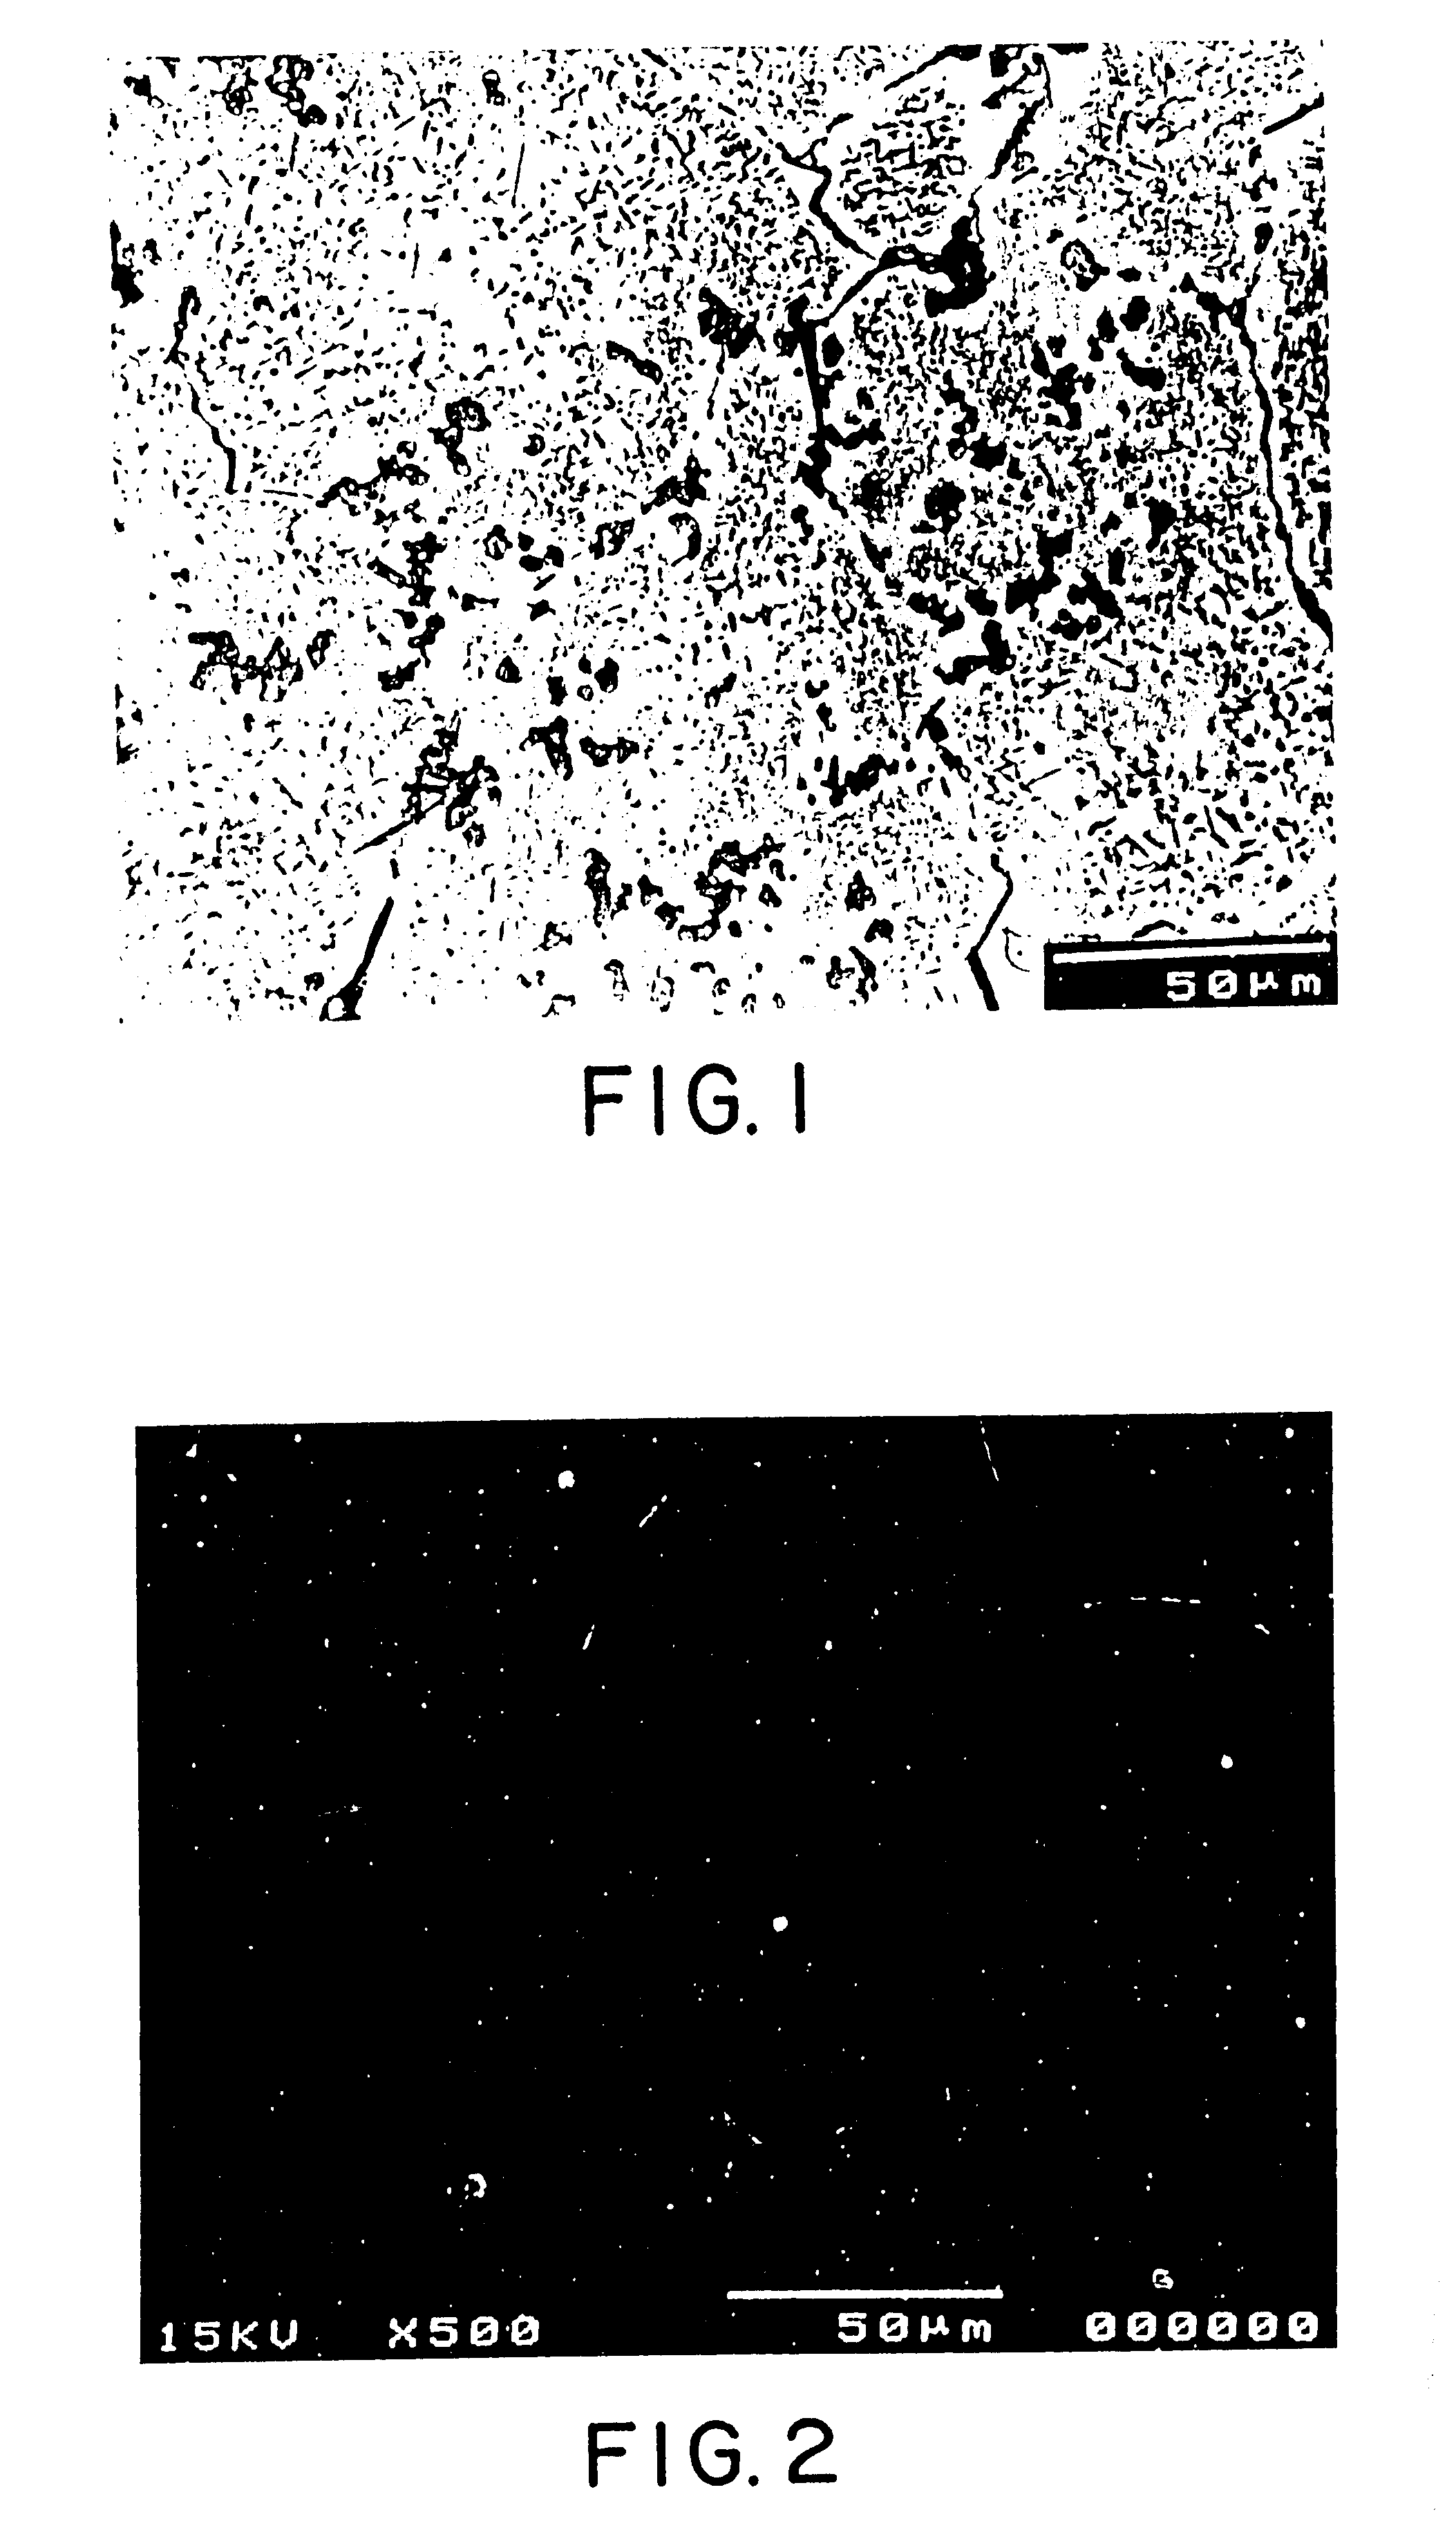 Uniformly dispersed, finely sized ceramic particles in metals and alloys